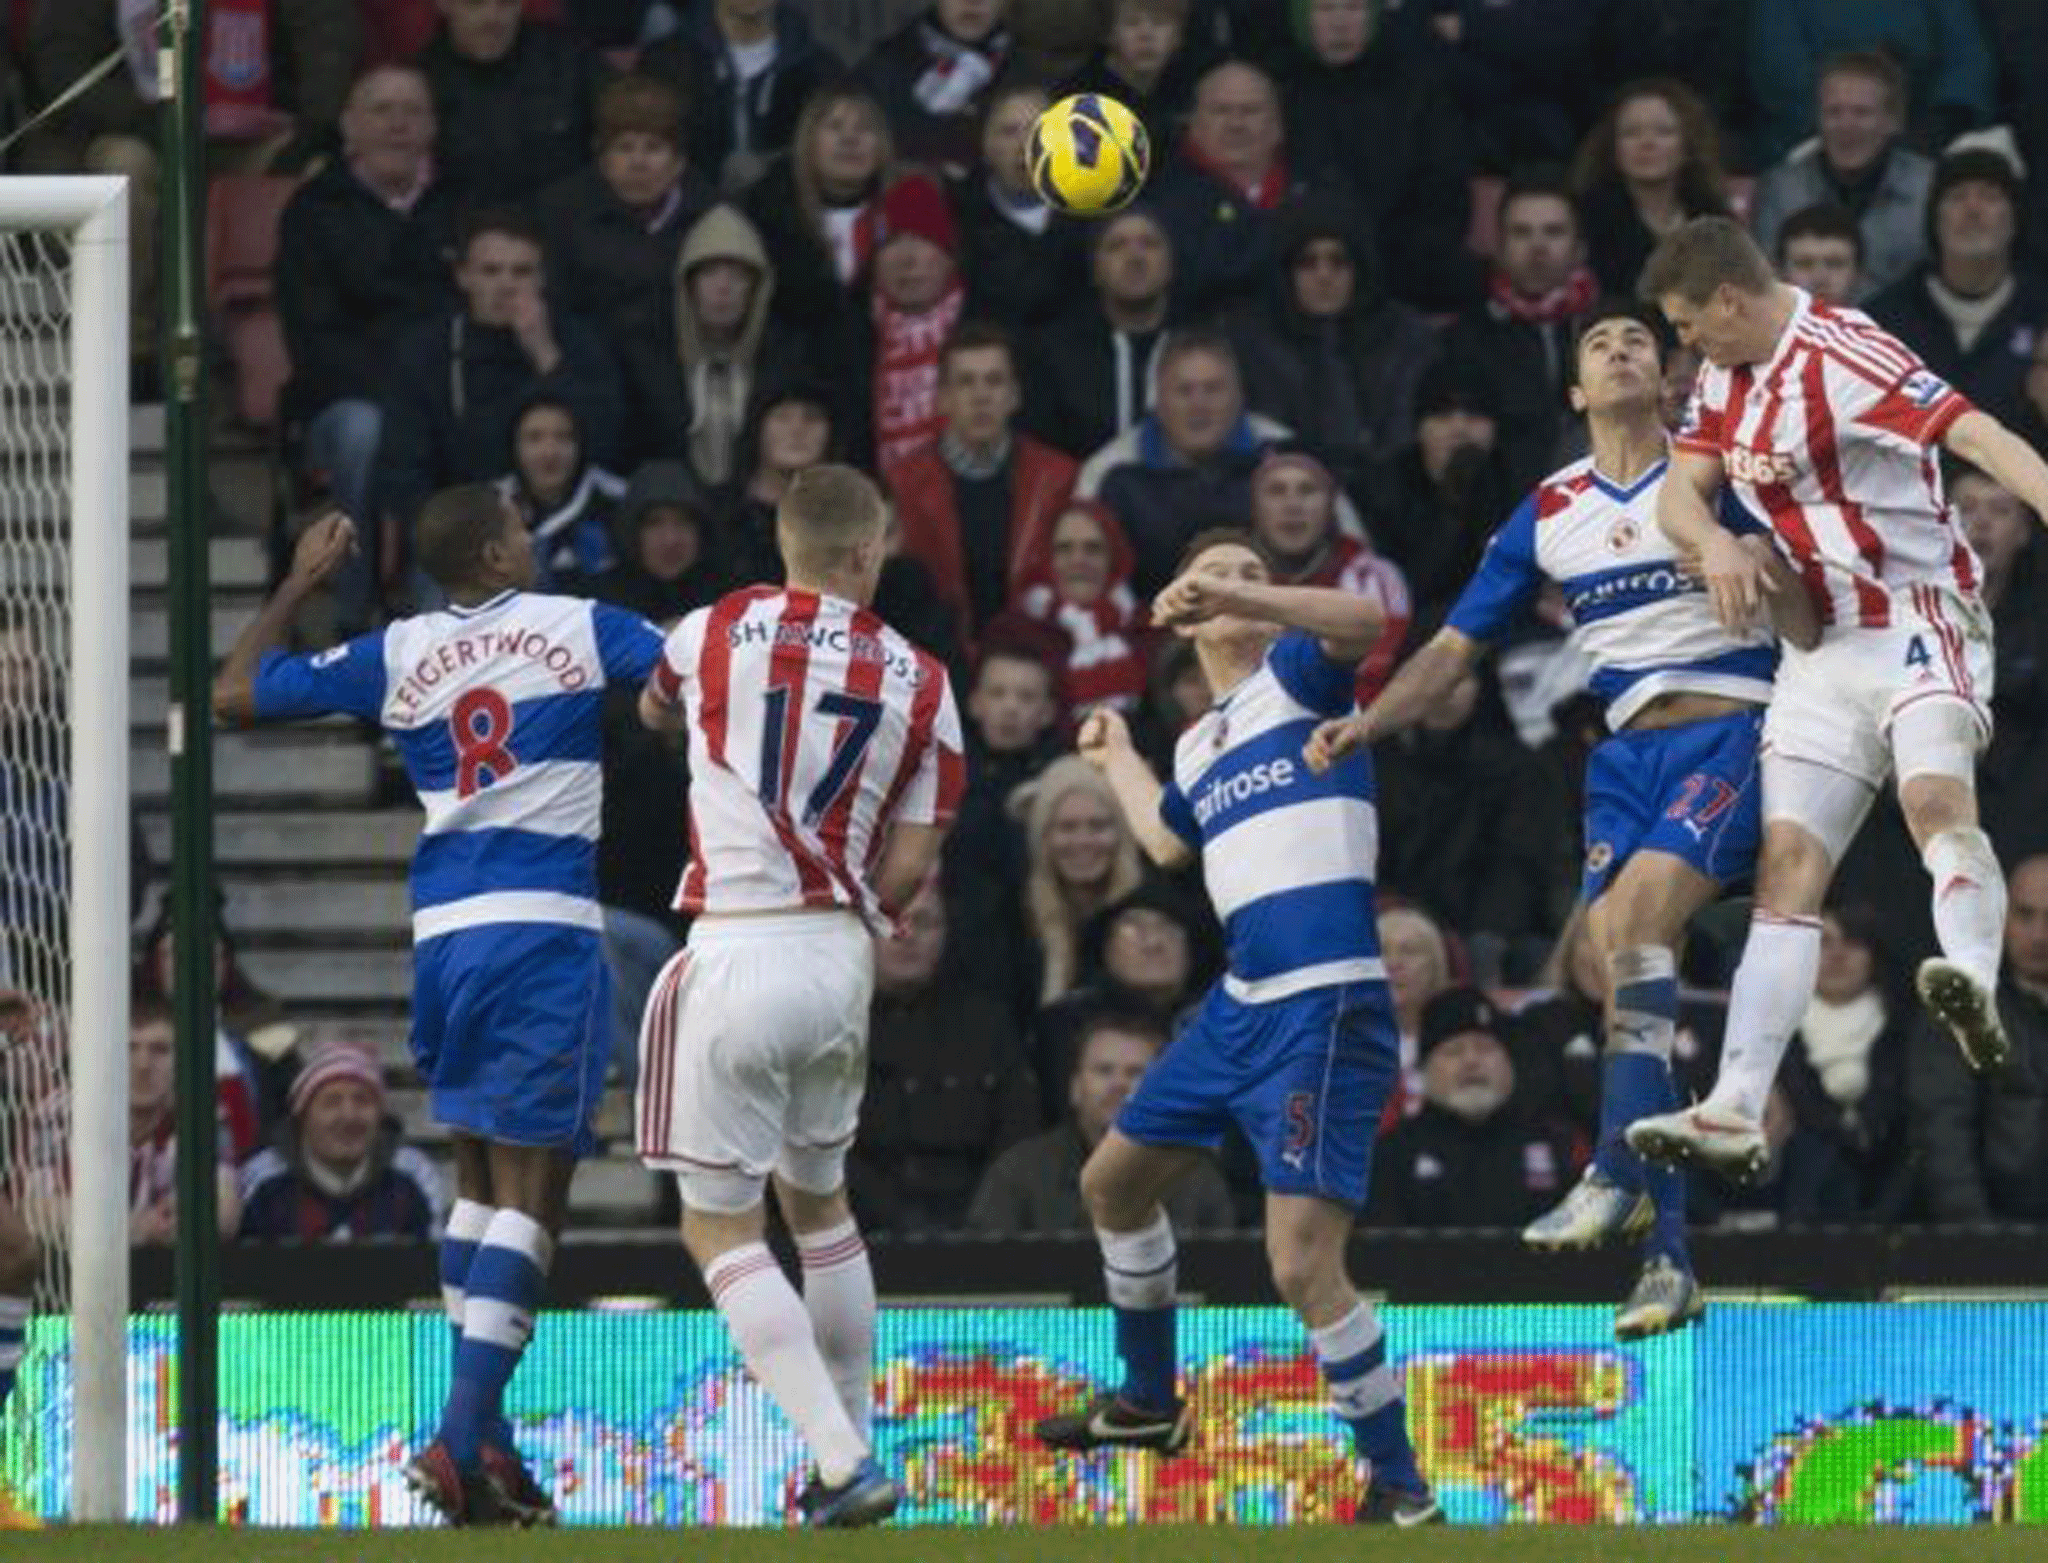 Stoke City 2 Reading 1: Robert Huth ruses to score Stoke's first goal